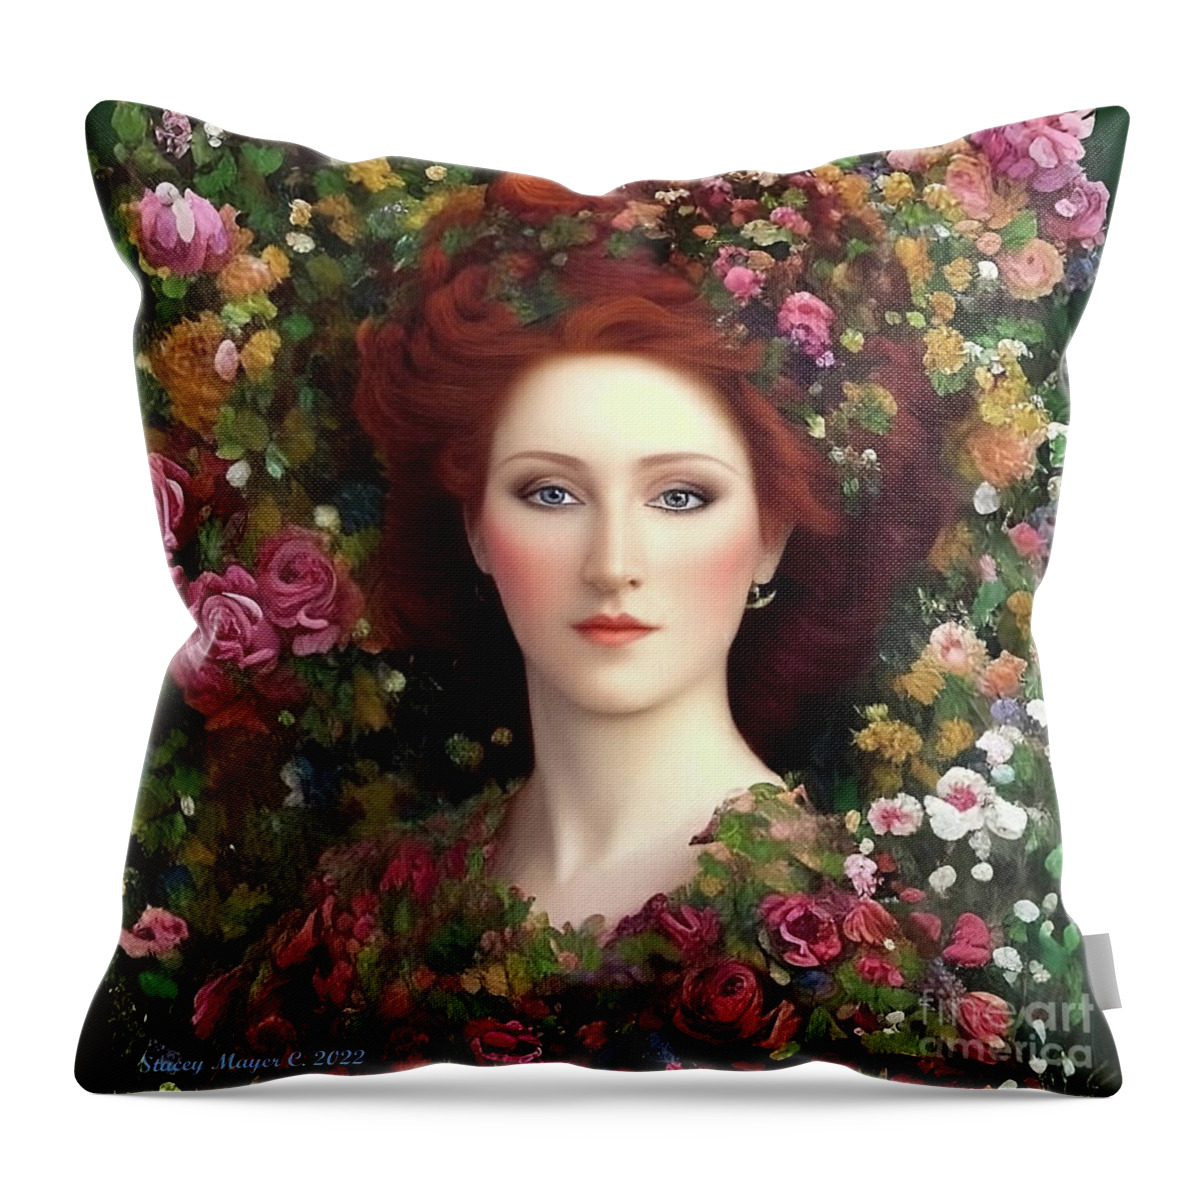 Fantasy Flowers Throw Pillow featuring the digital art Flower Fantasy Jennie by Stacey Mayer